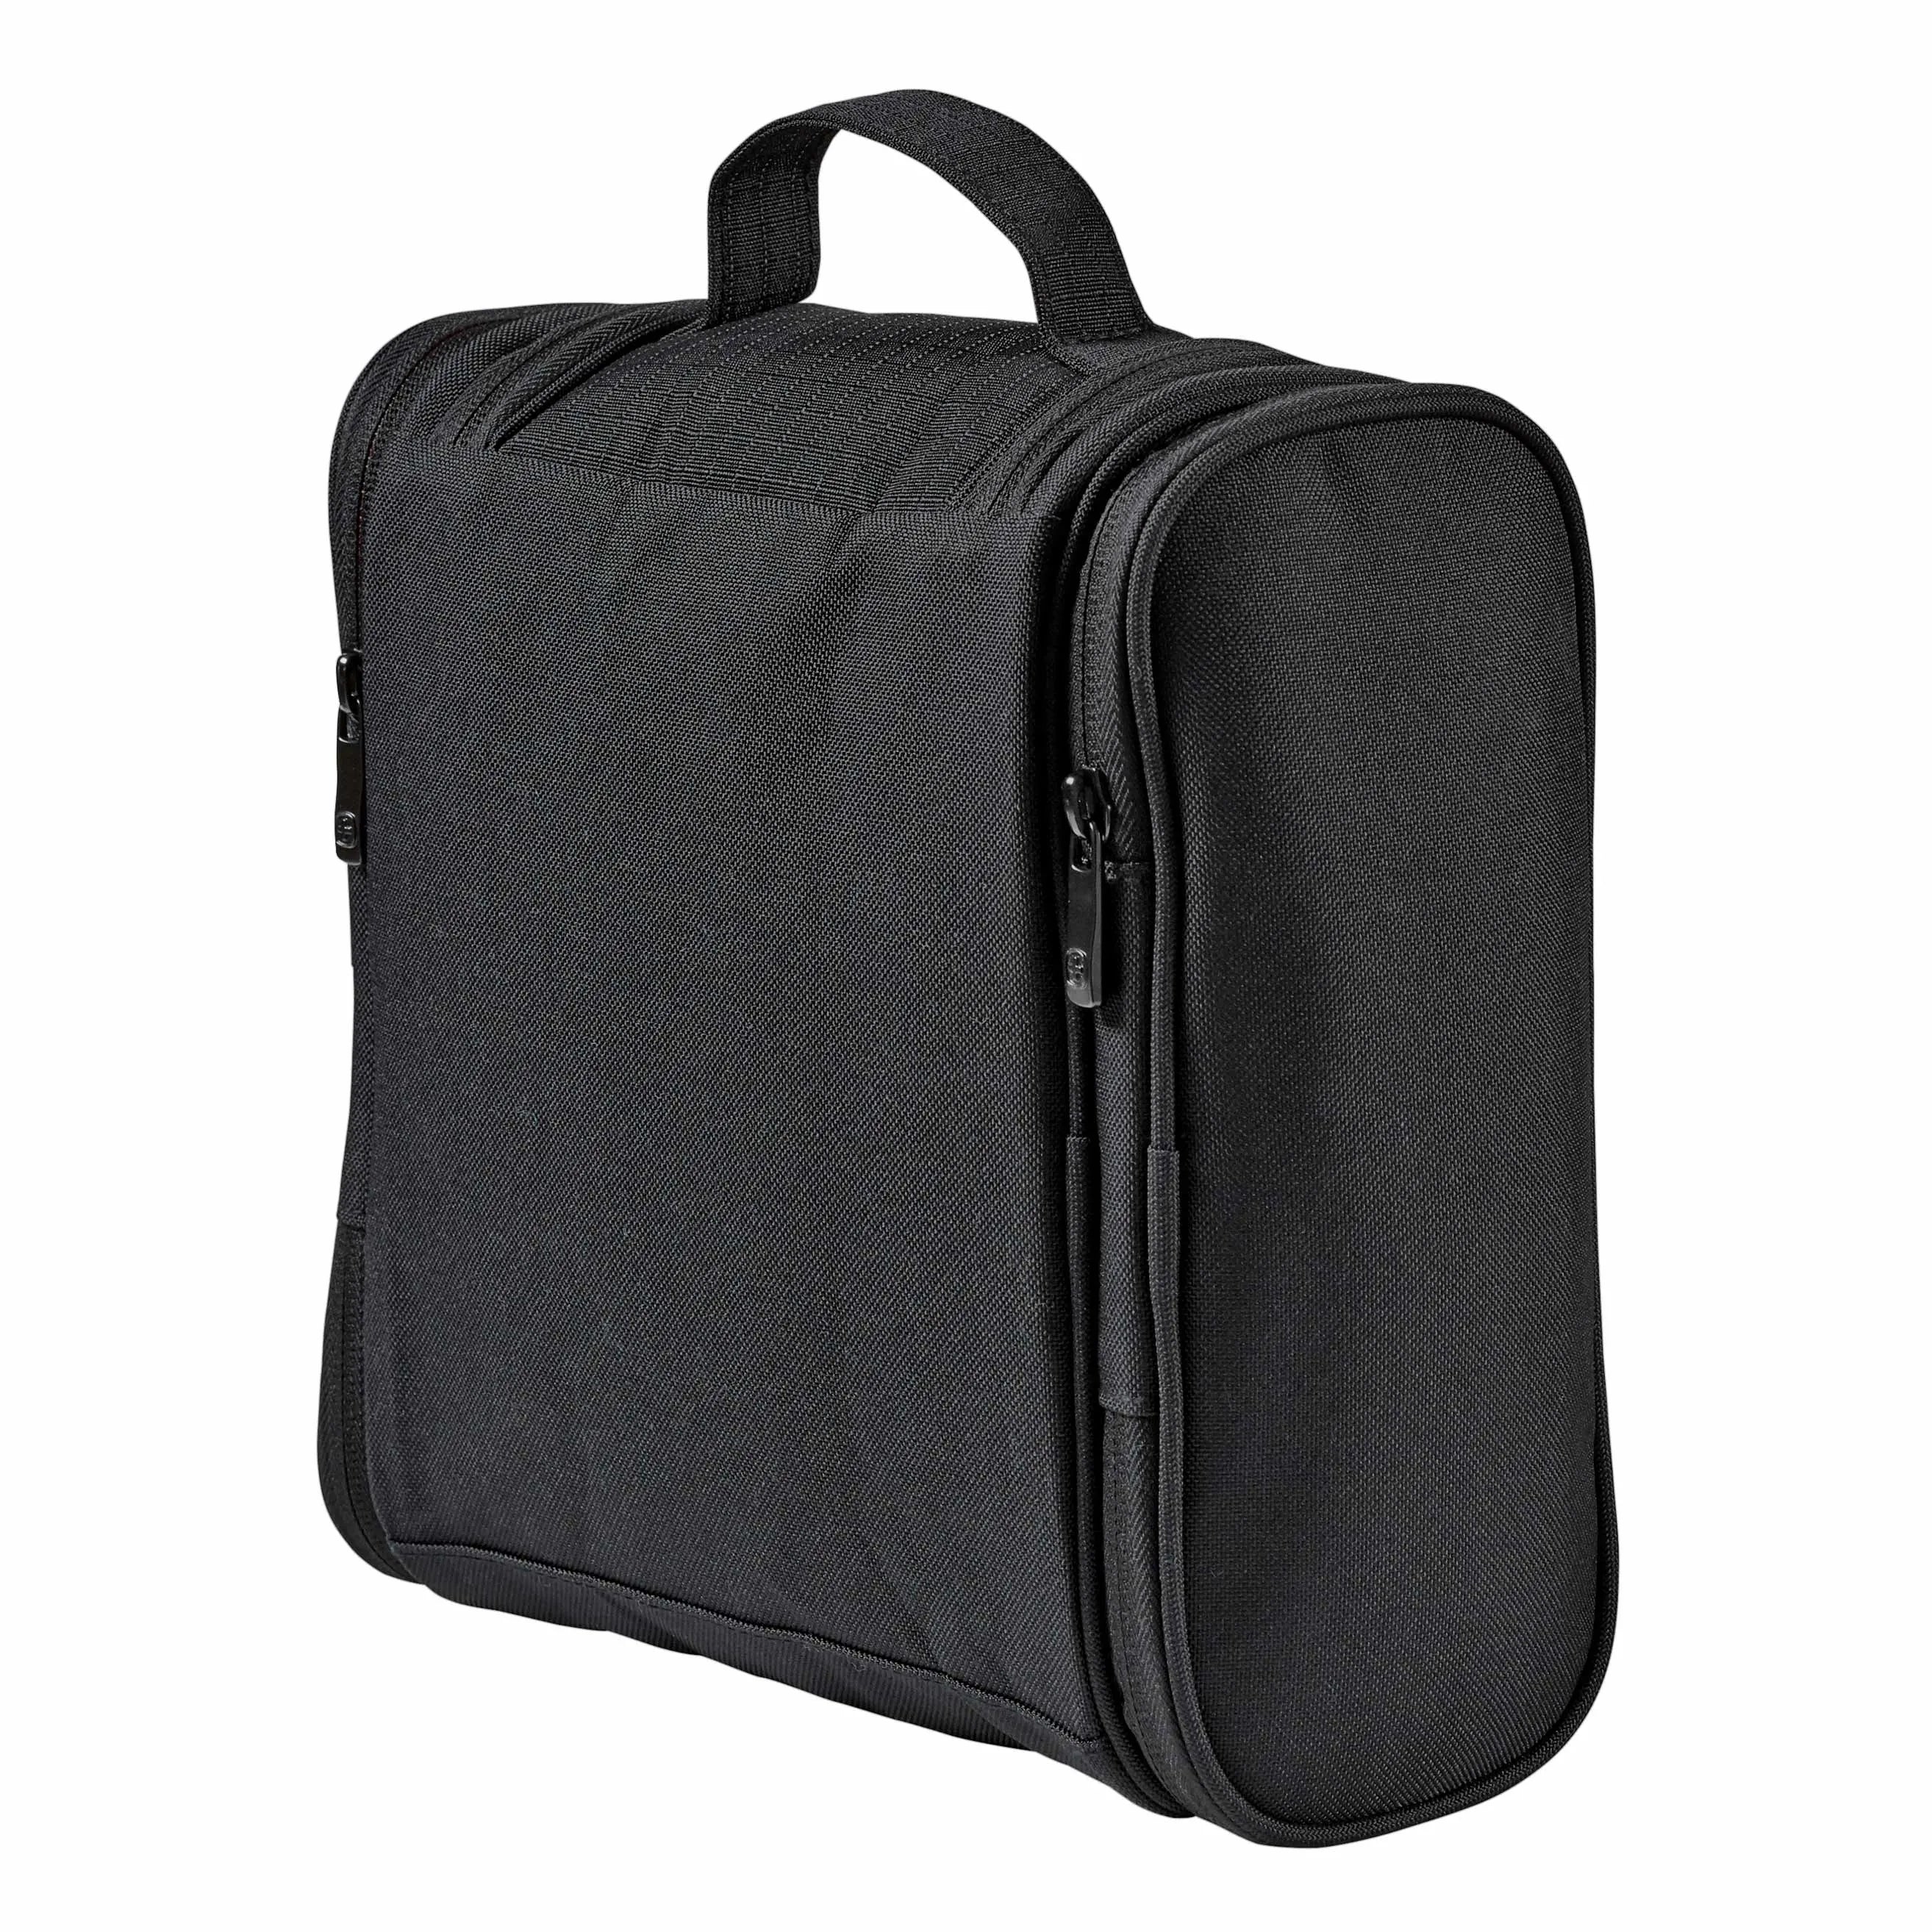 Wenger travel accessories hanging toiletry bag 24 cm - Black